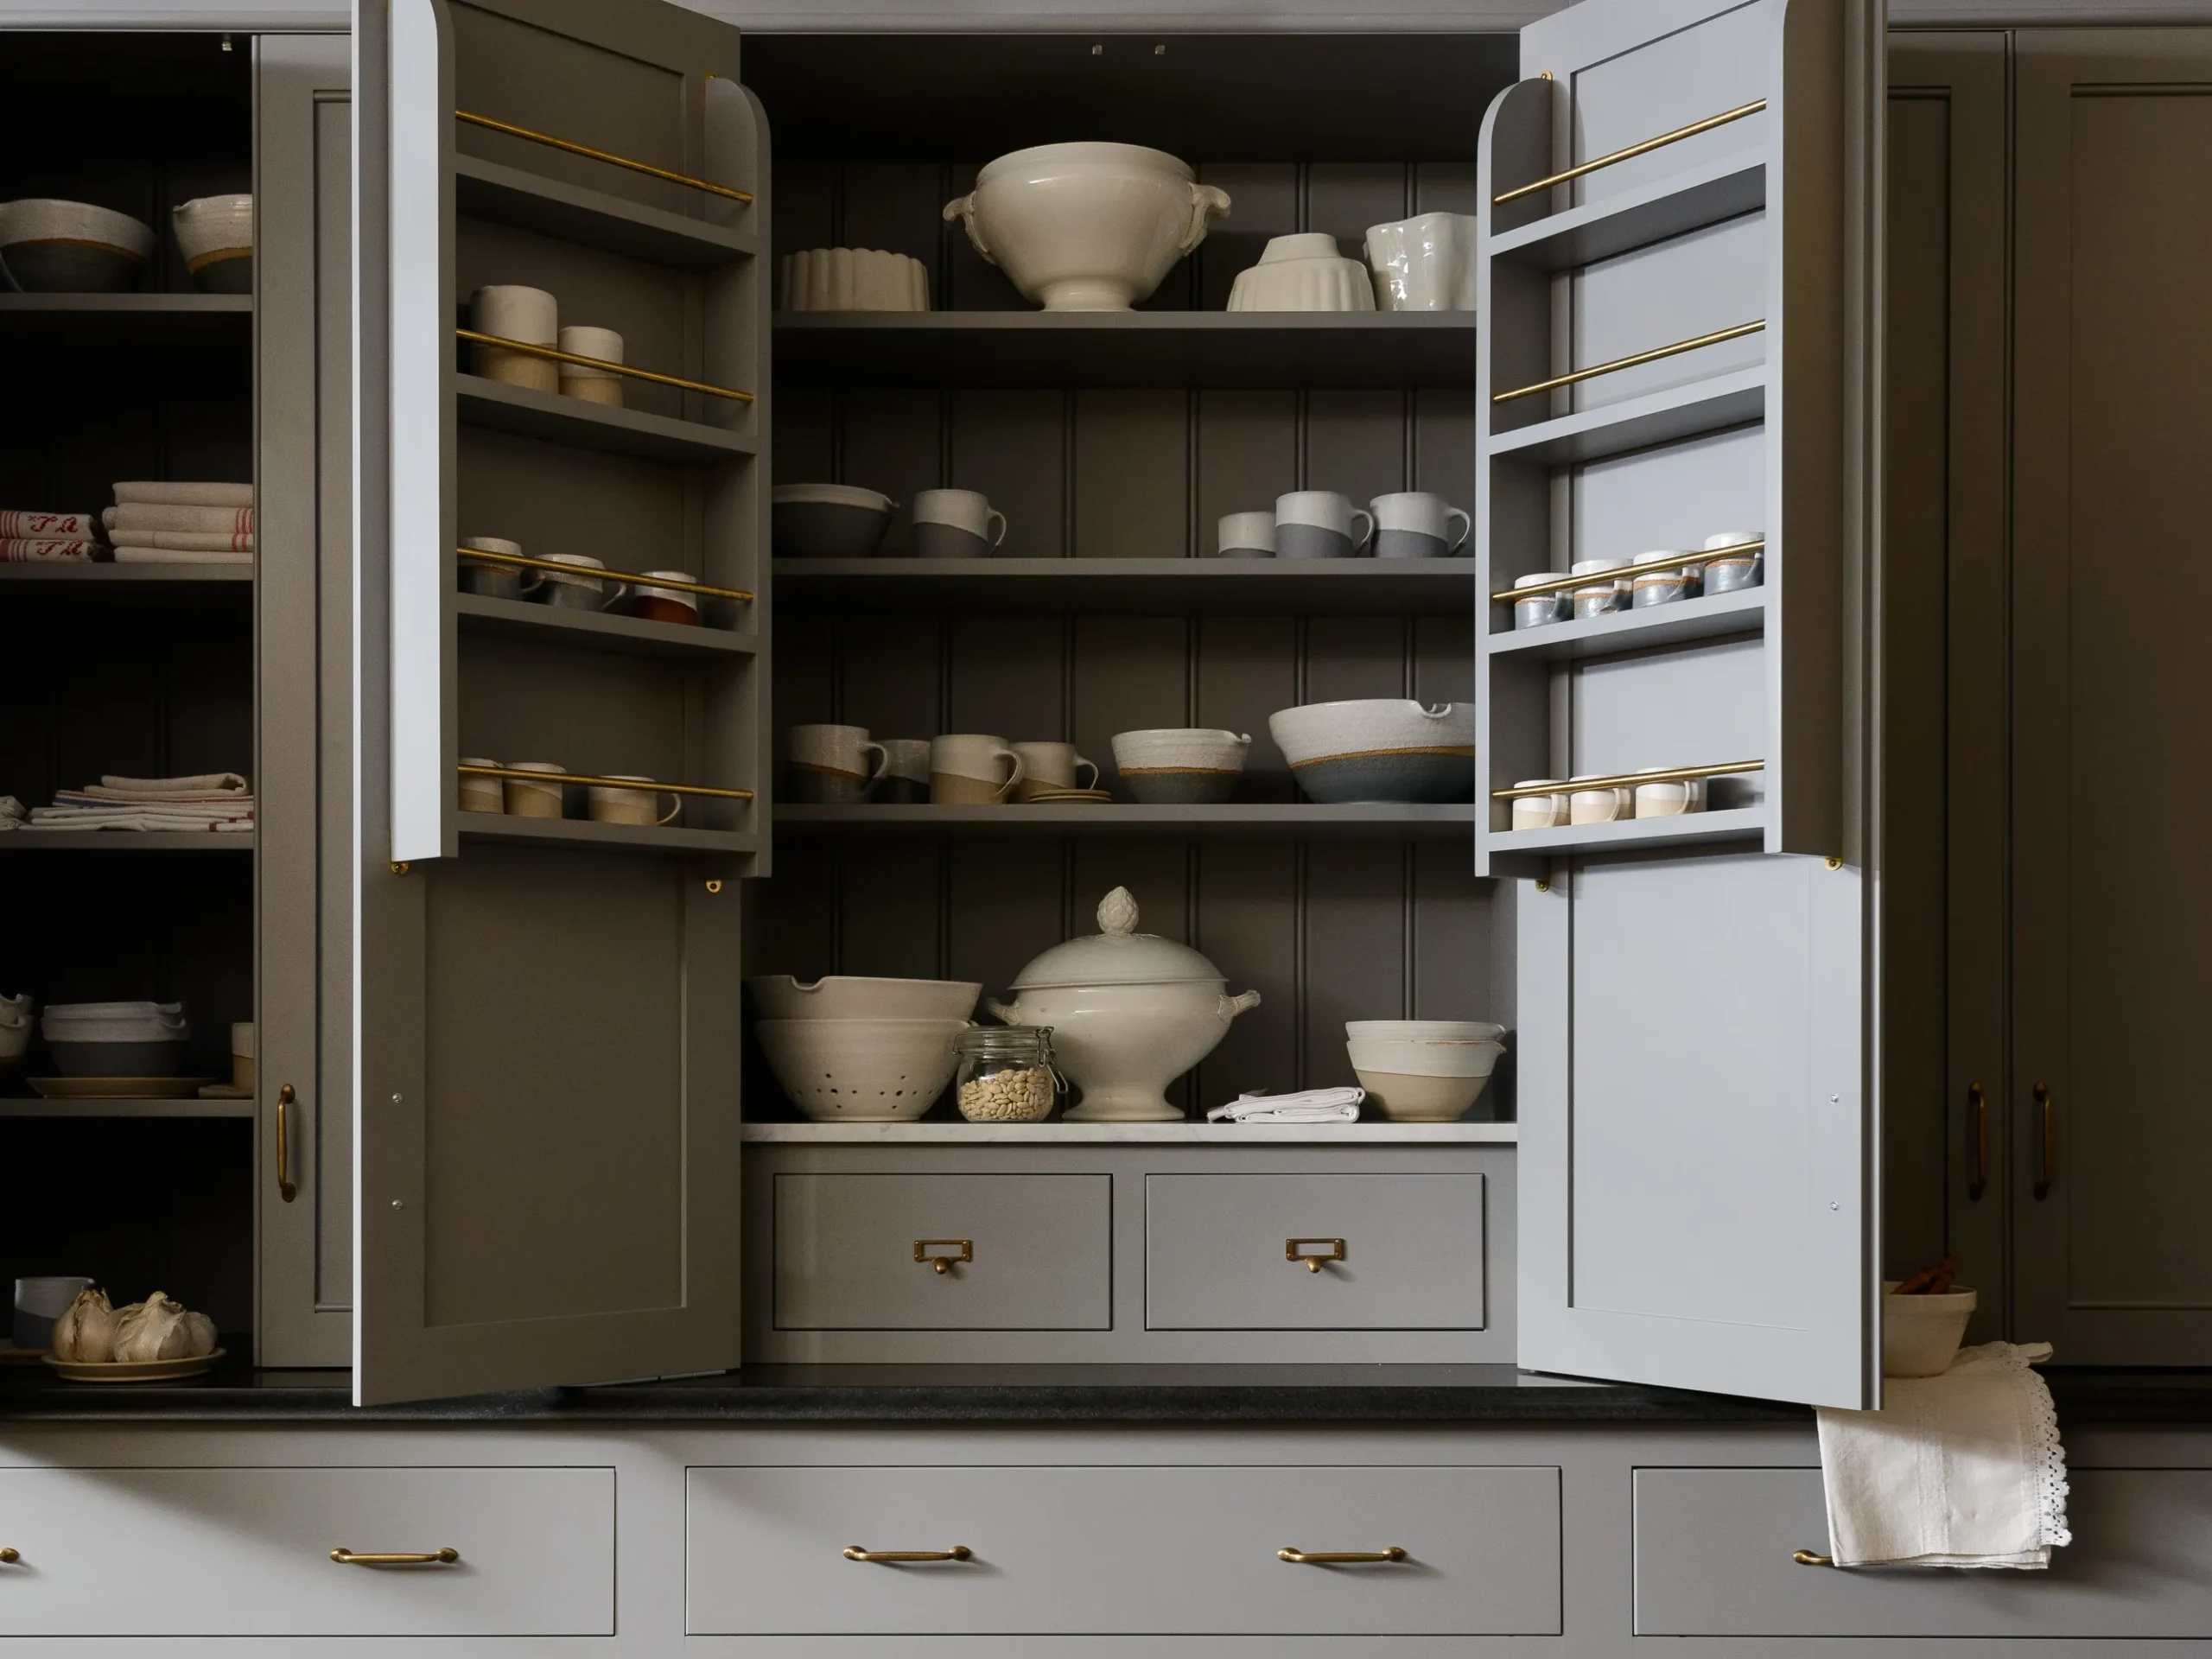 storage space for other items in a kitchen